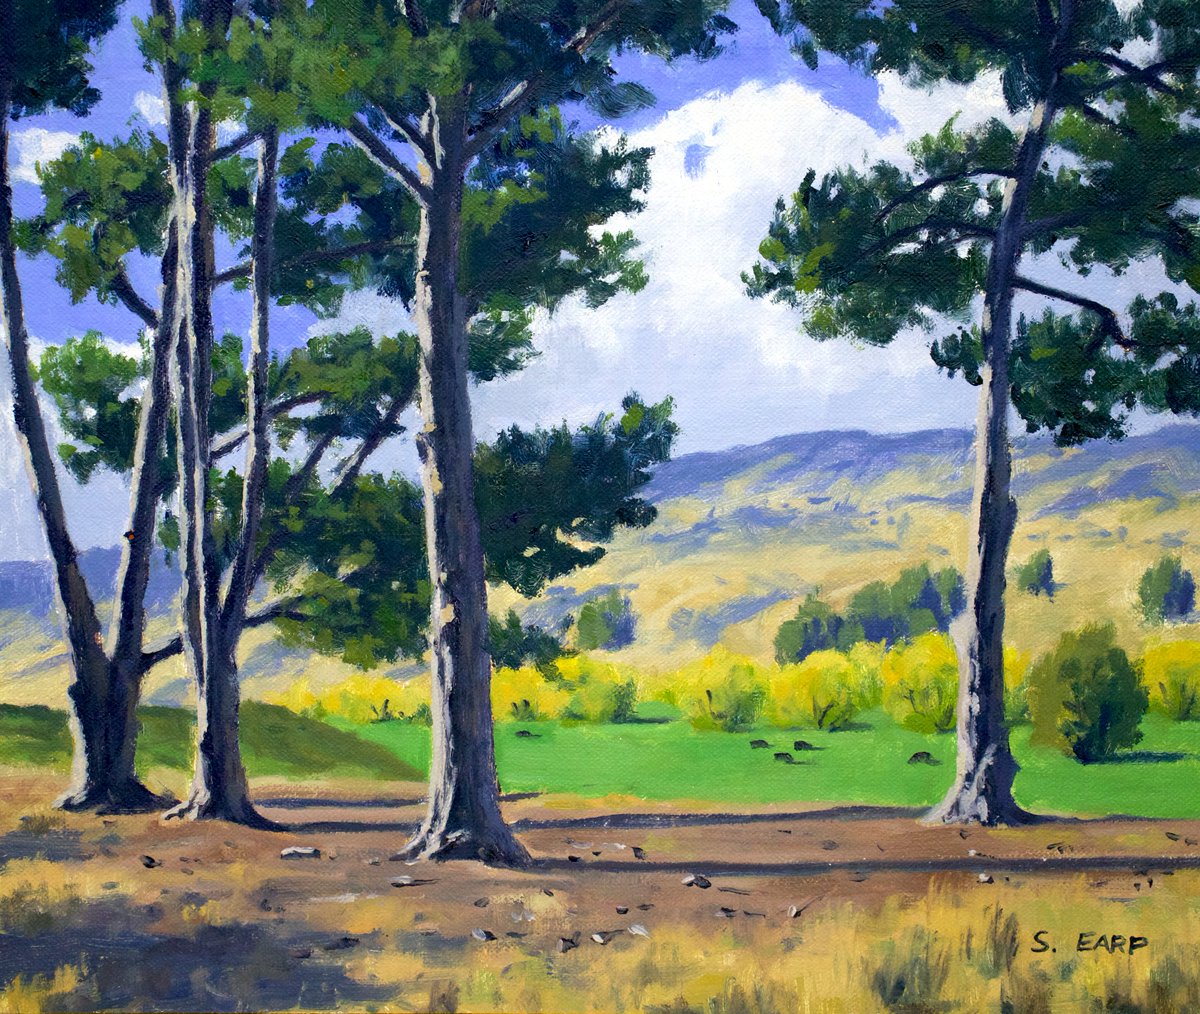 Painting Landscapes in Oils - eBook